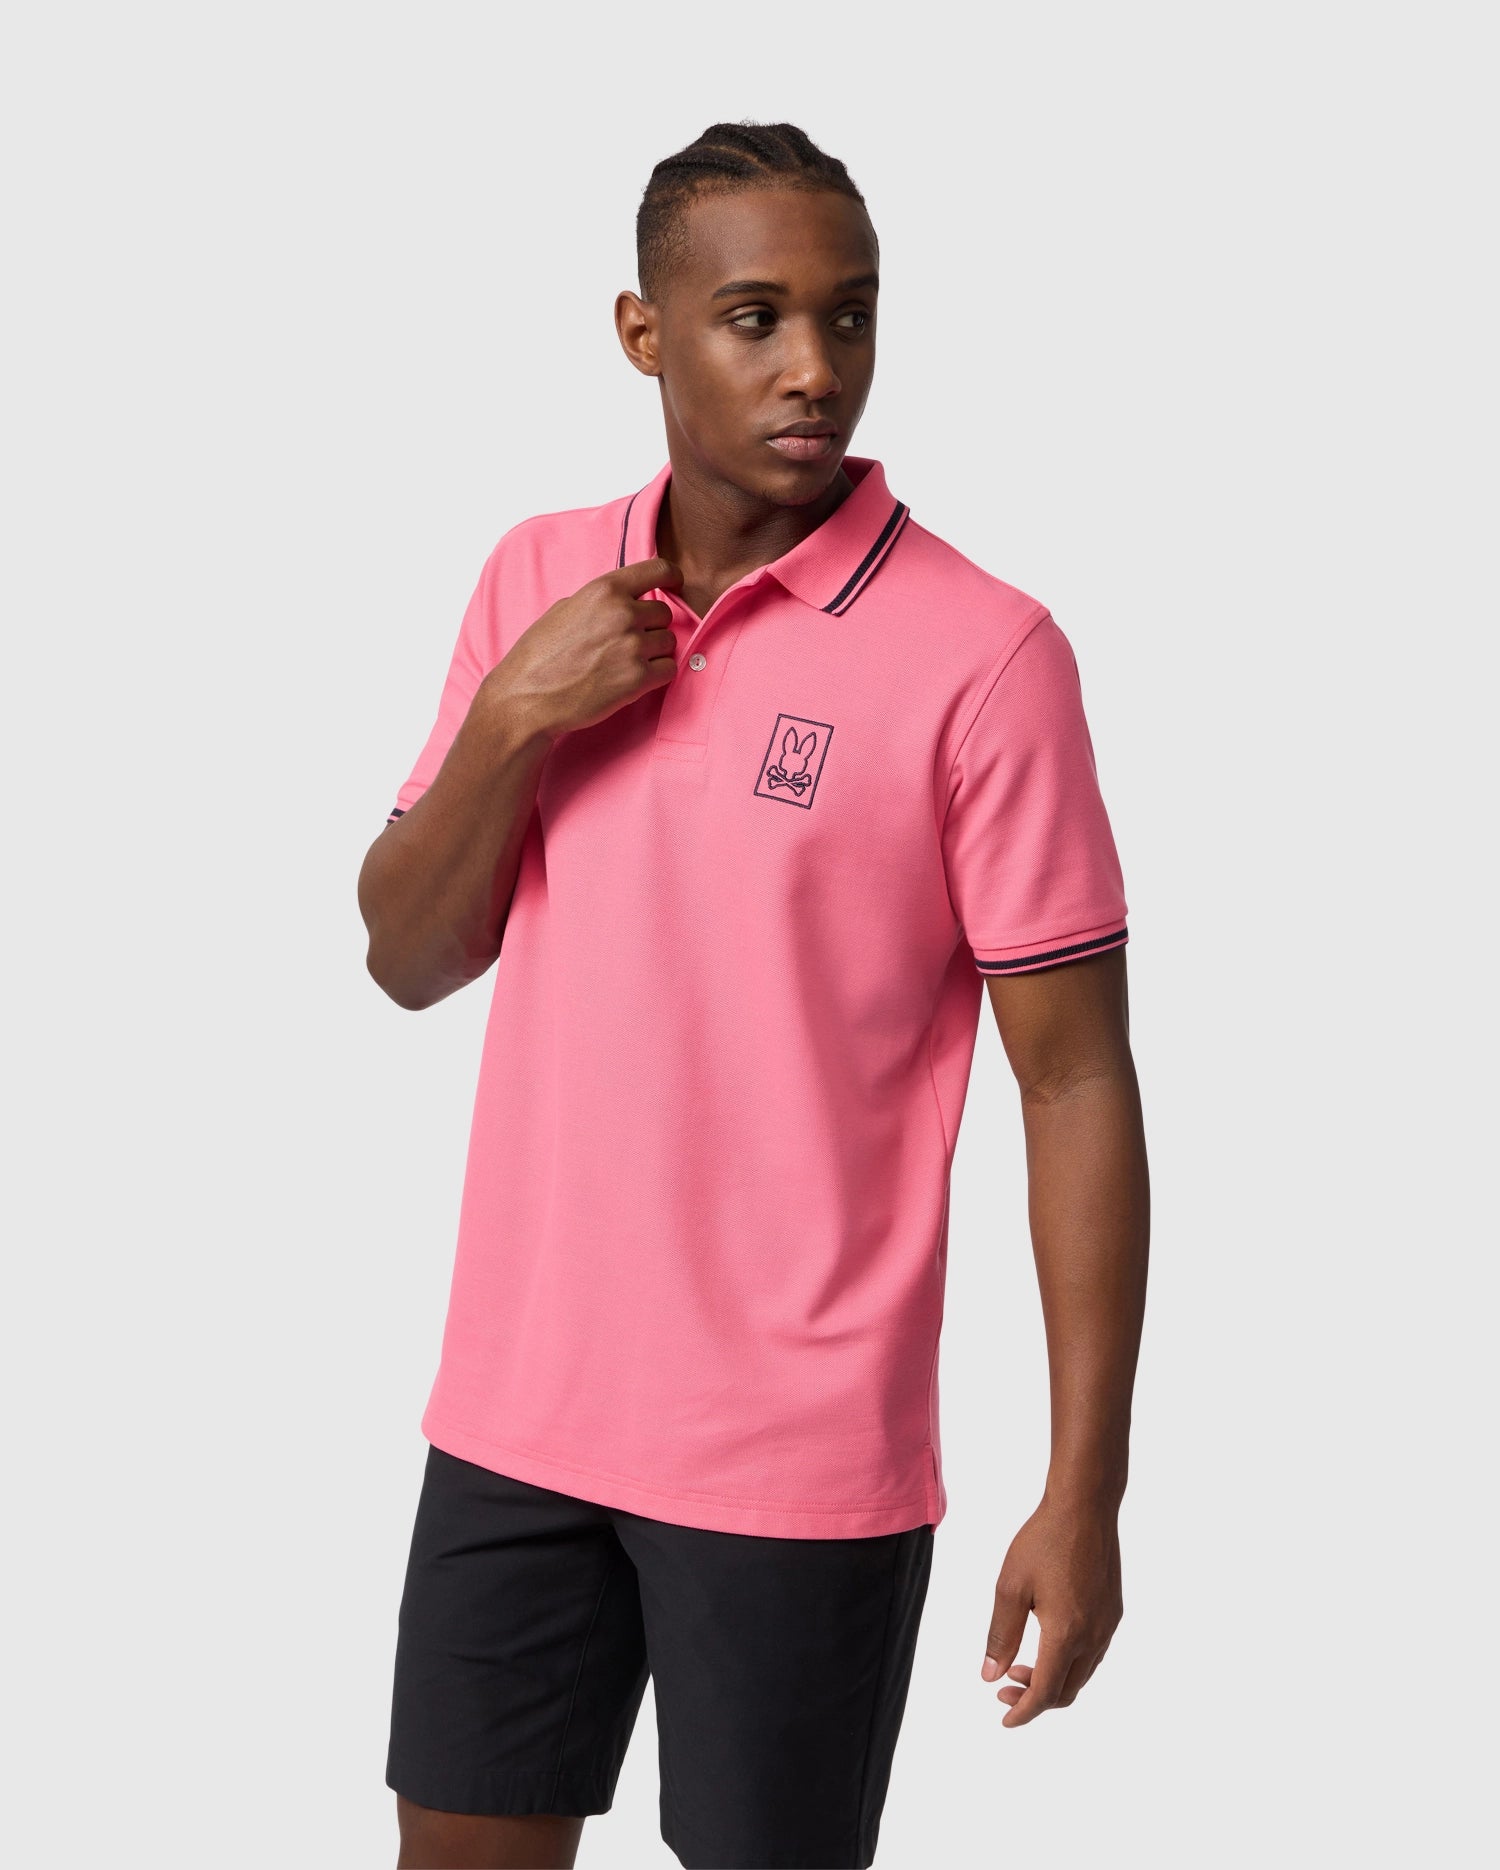 A young man in a Psycho Bunny MEN'S ARCADIA PIQUE POLO SHIRT - B6K406B200 with a crease-resistant collar, and a logo on the chest, paired with black shorts, looking to the side against a plain background.